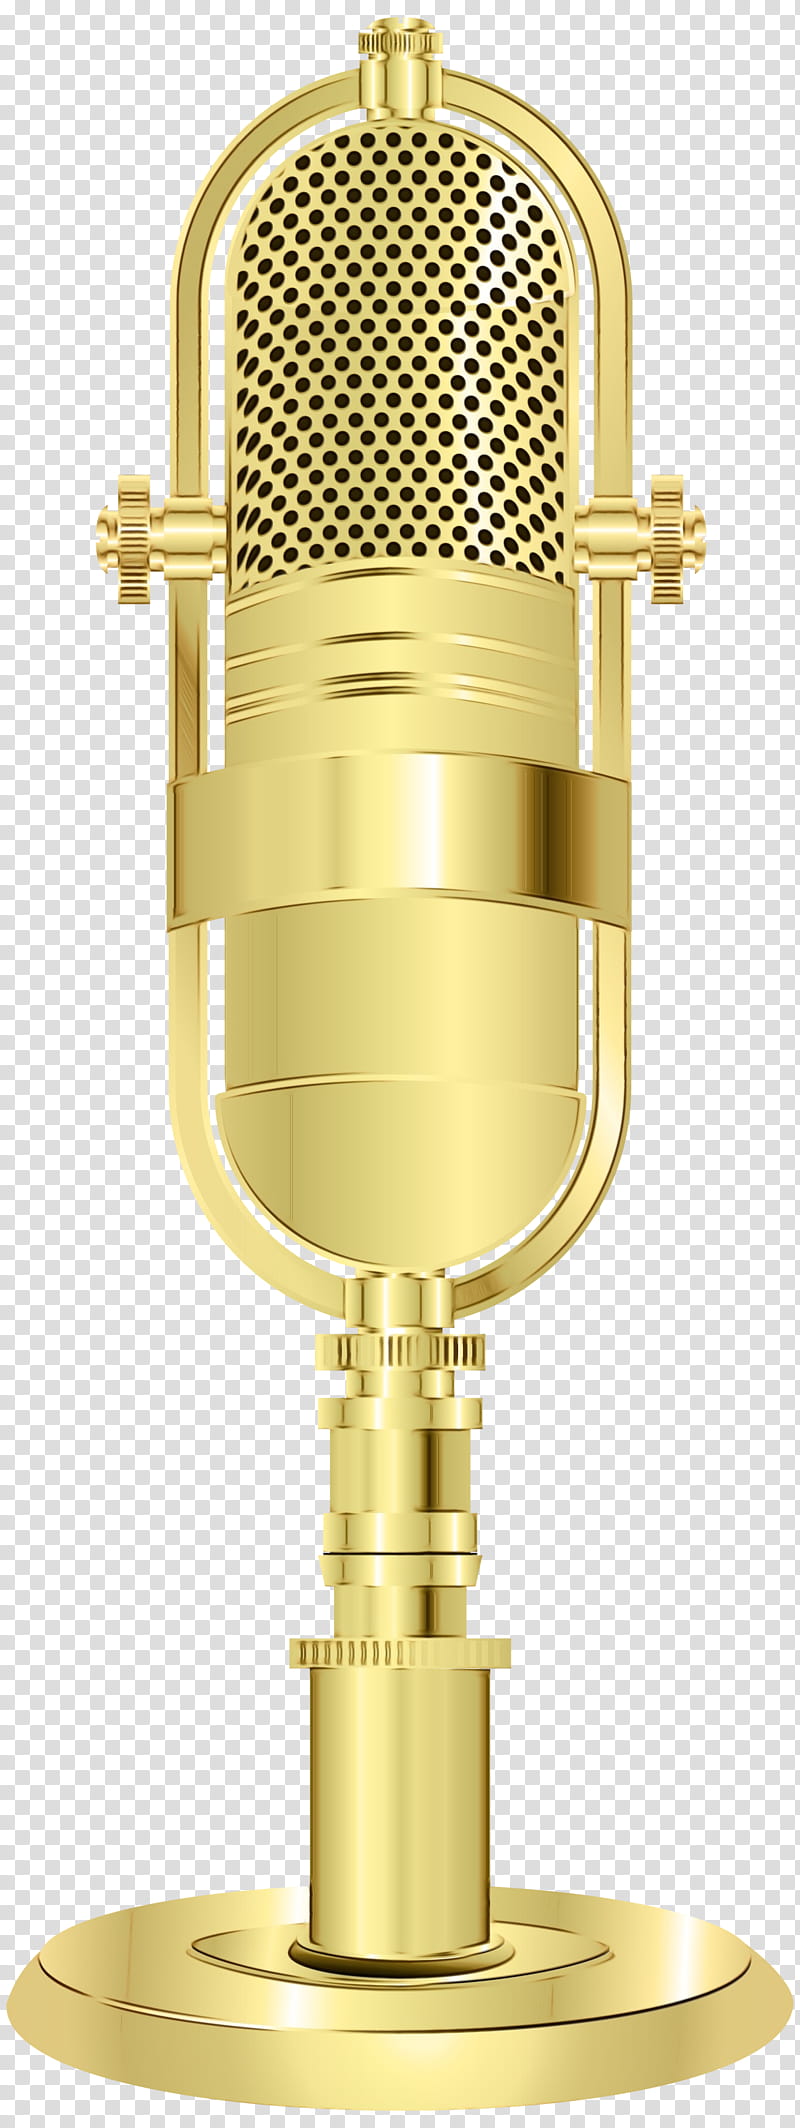 Microphone, Watercolor, Paint, Wet Ink, Brass, Metal, Audio Equipment transparent background PNG clipart